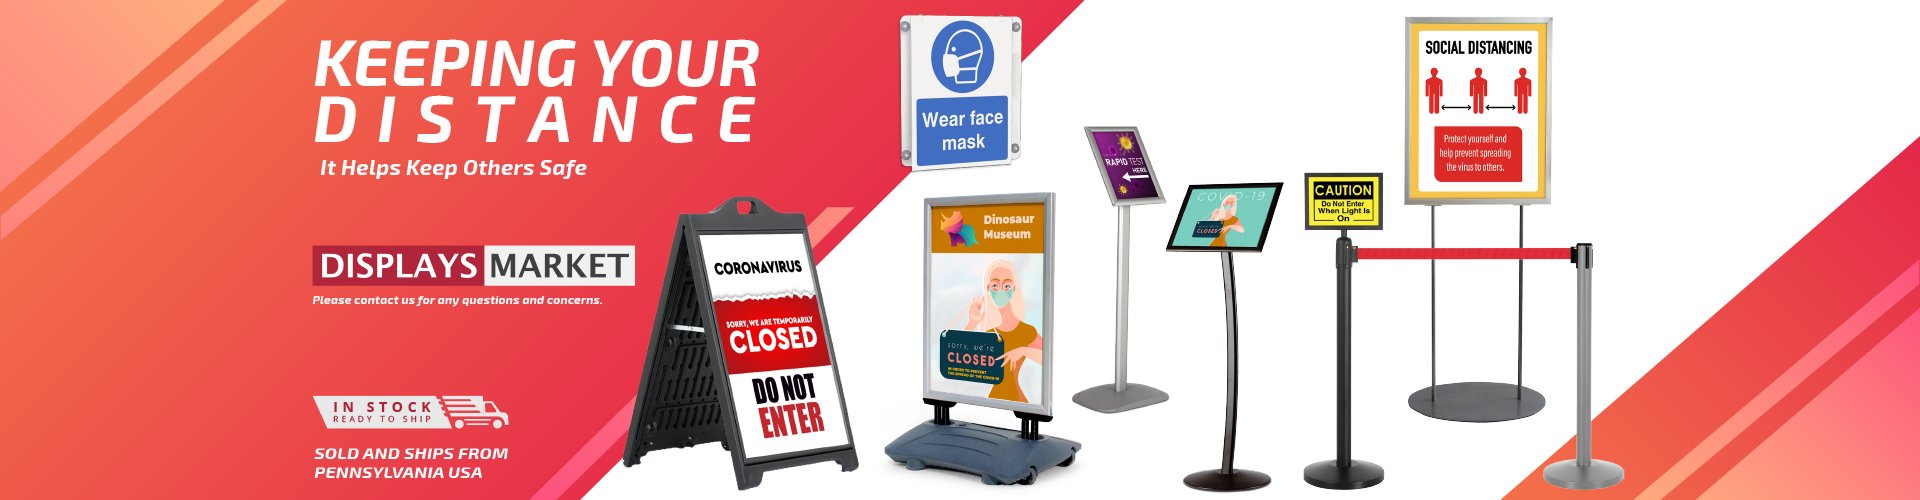 Poster Display Stands Point Advertising to Potential Customers –  lightsboxshop